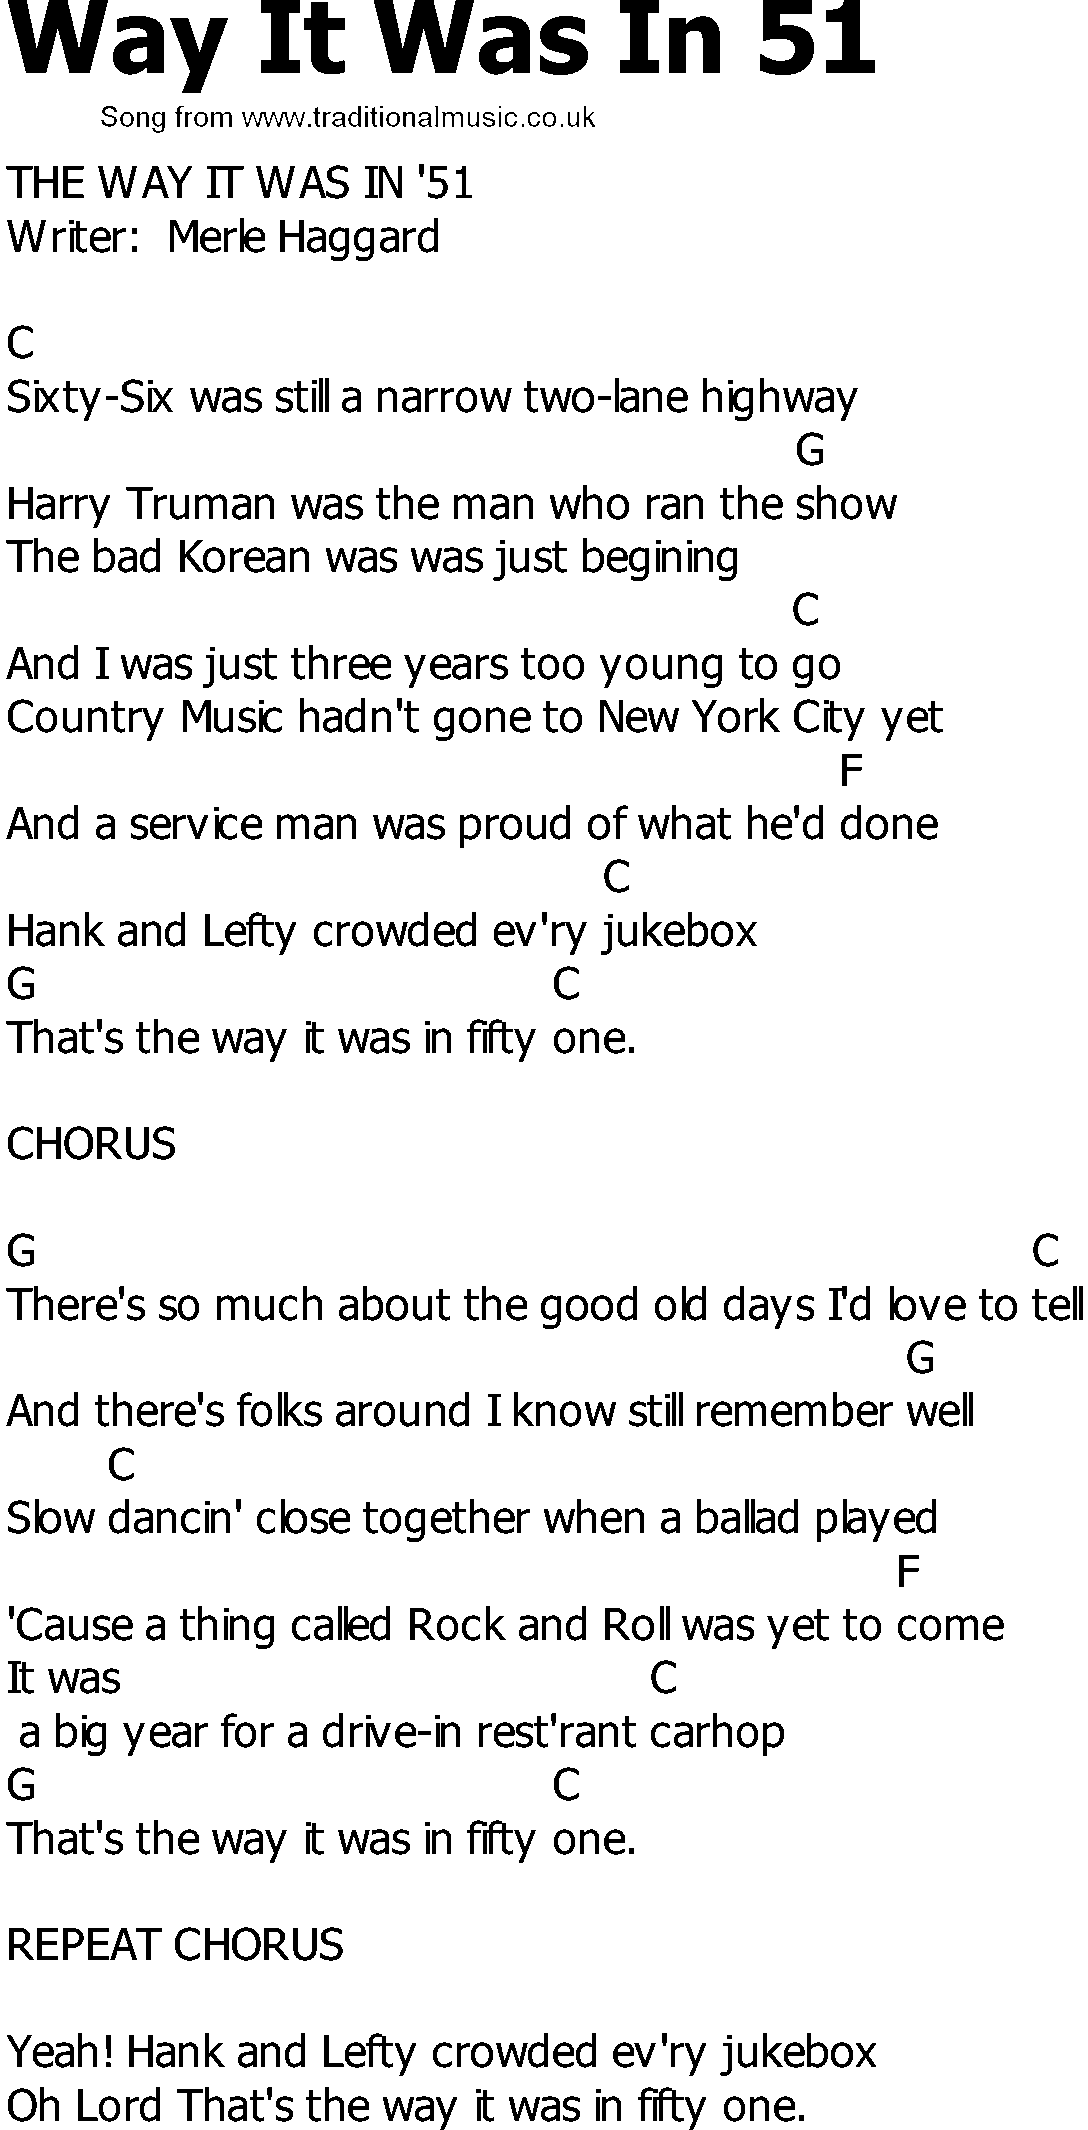 Old Country song lyrics with chords - Way It Was In 51